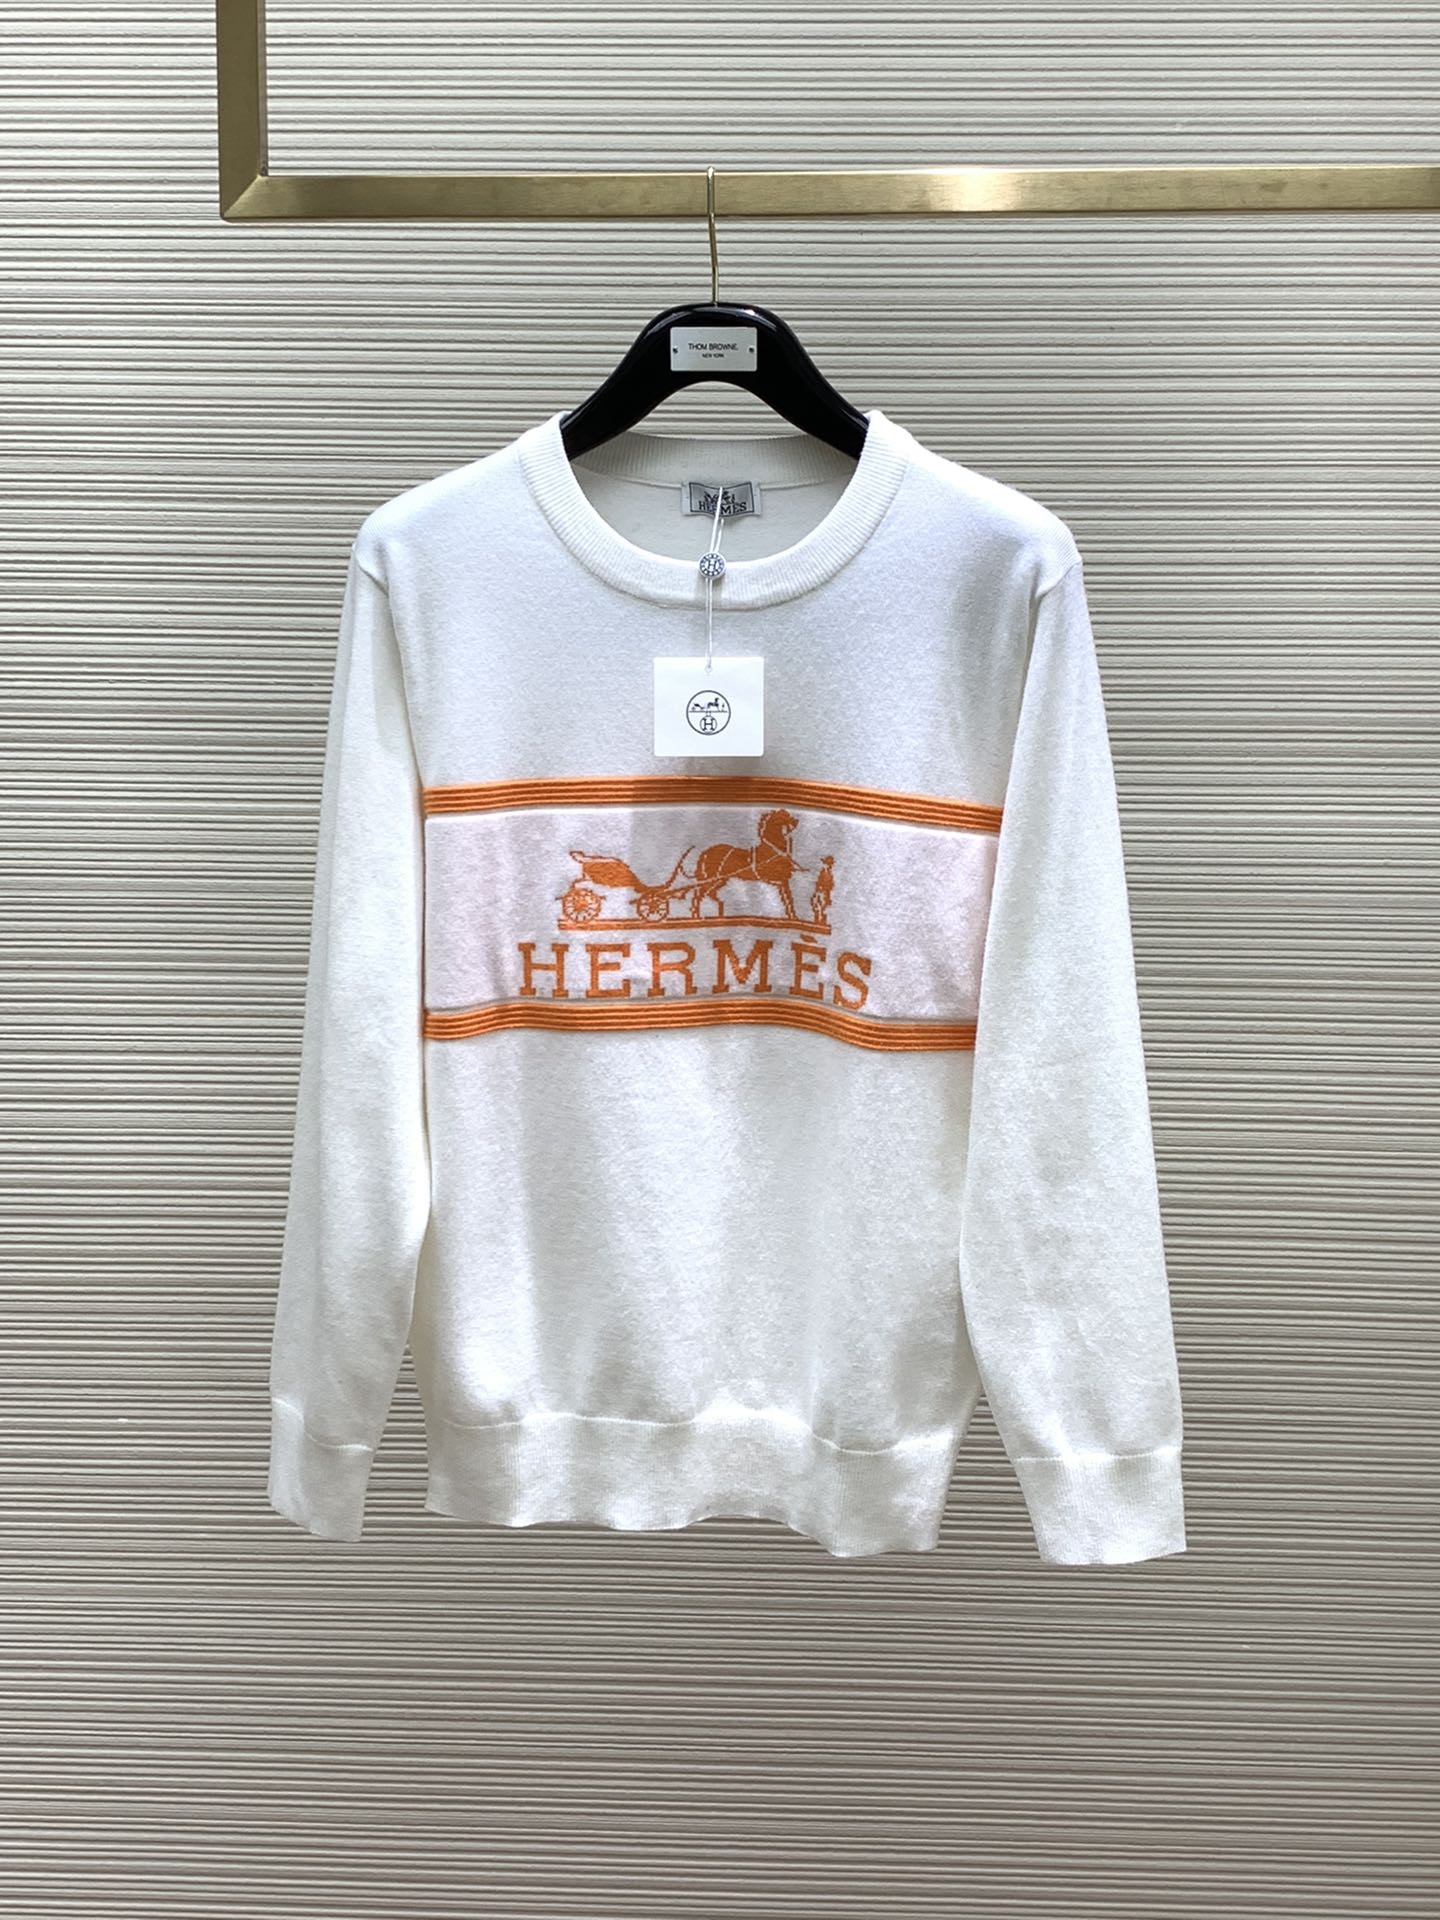 Hermes Clothing Knit Sweater Sweatshirts Embroidery Knitting Fall/Winter Collection Fashion Long Sleeve